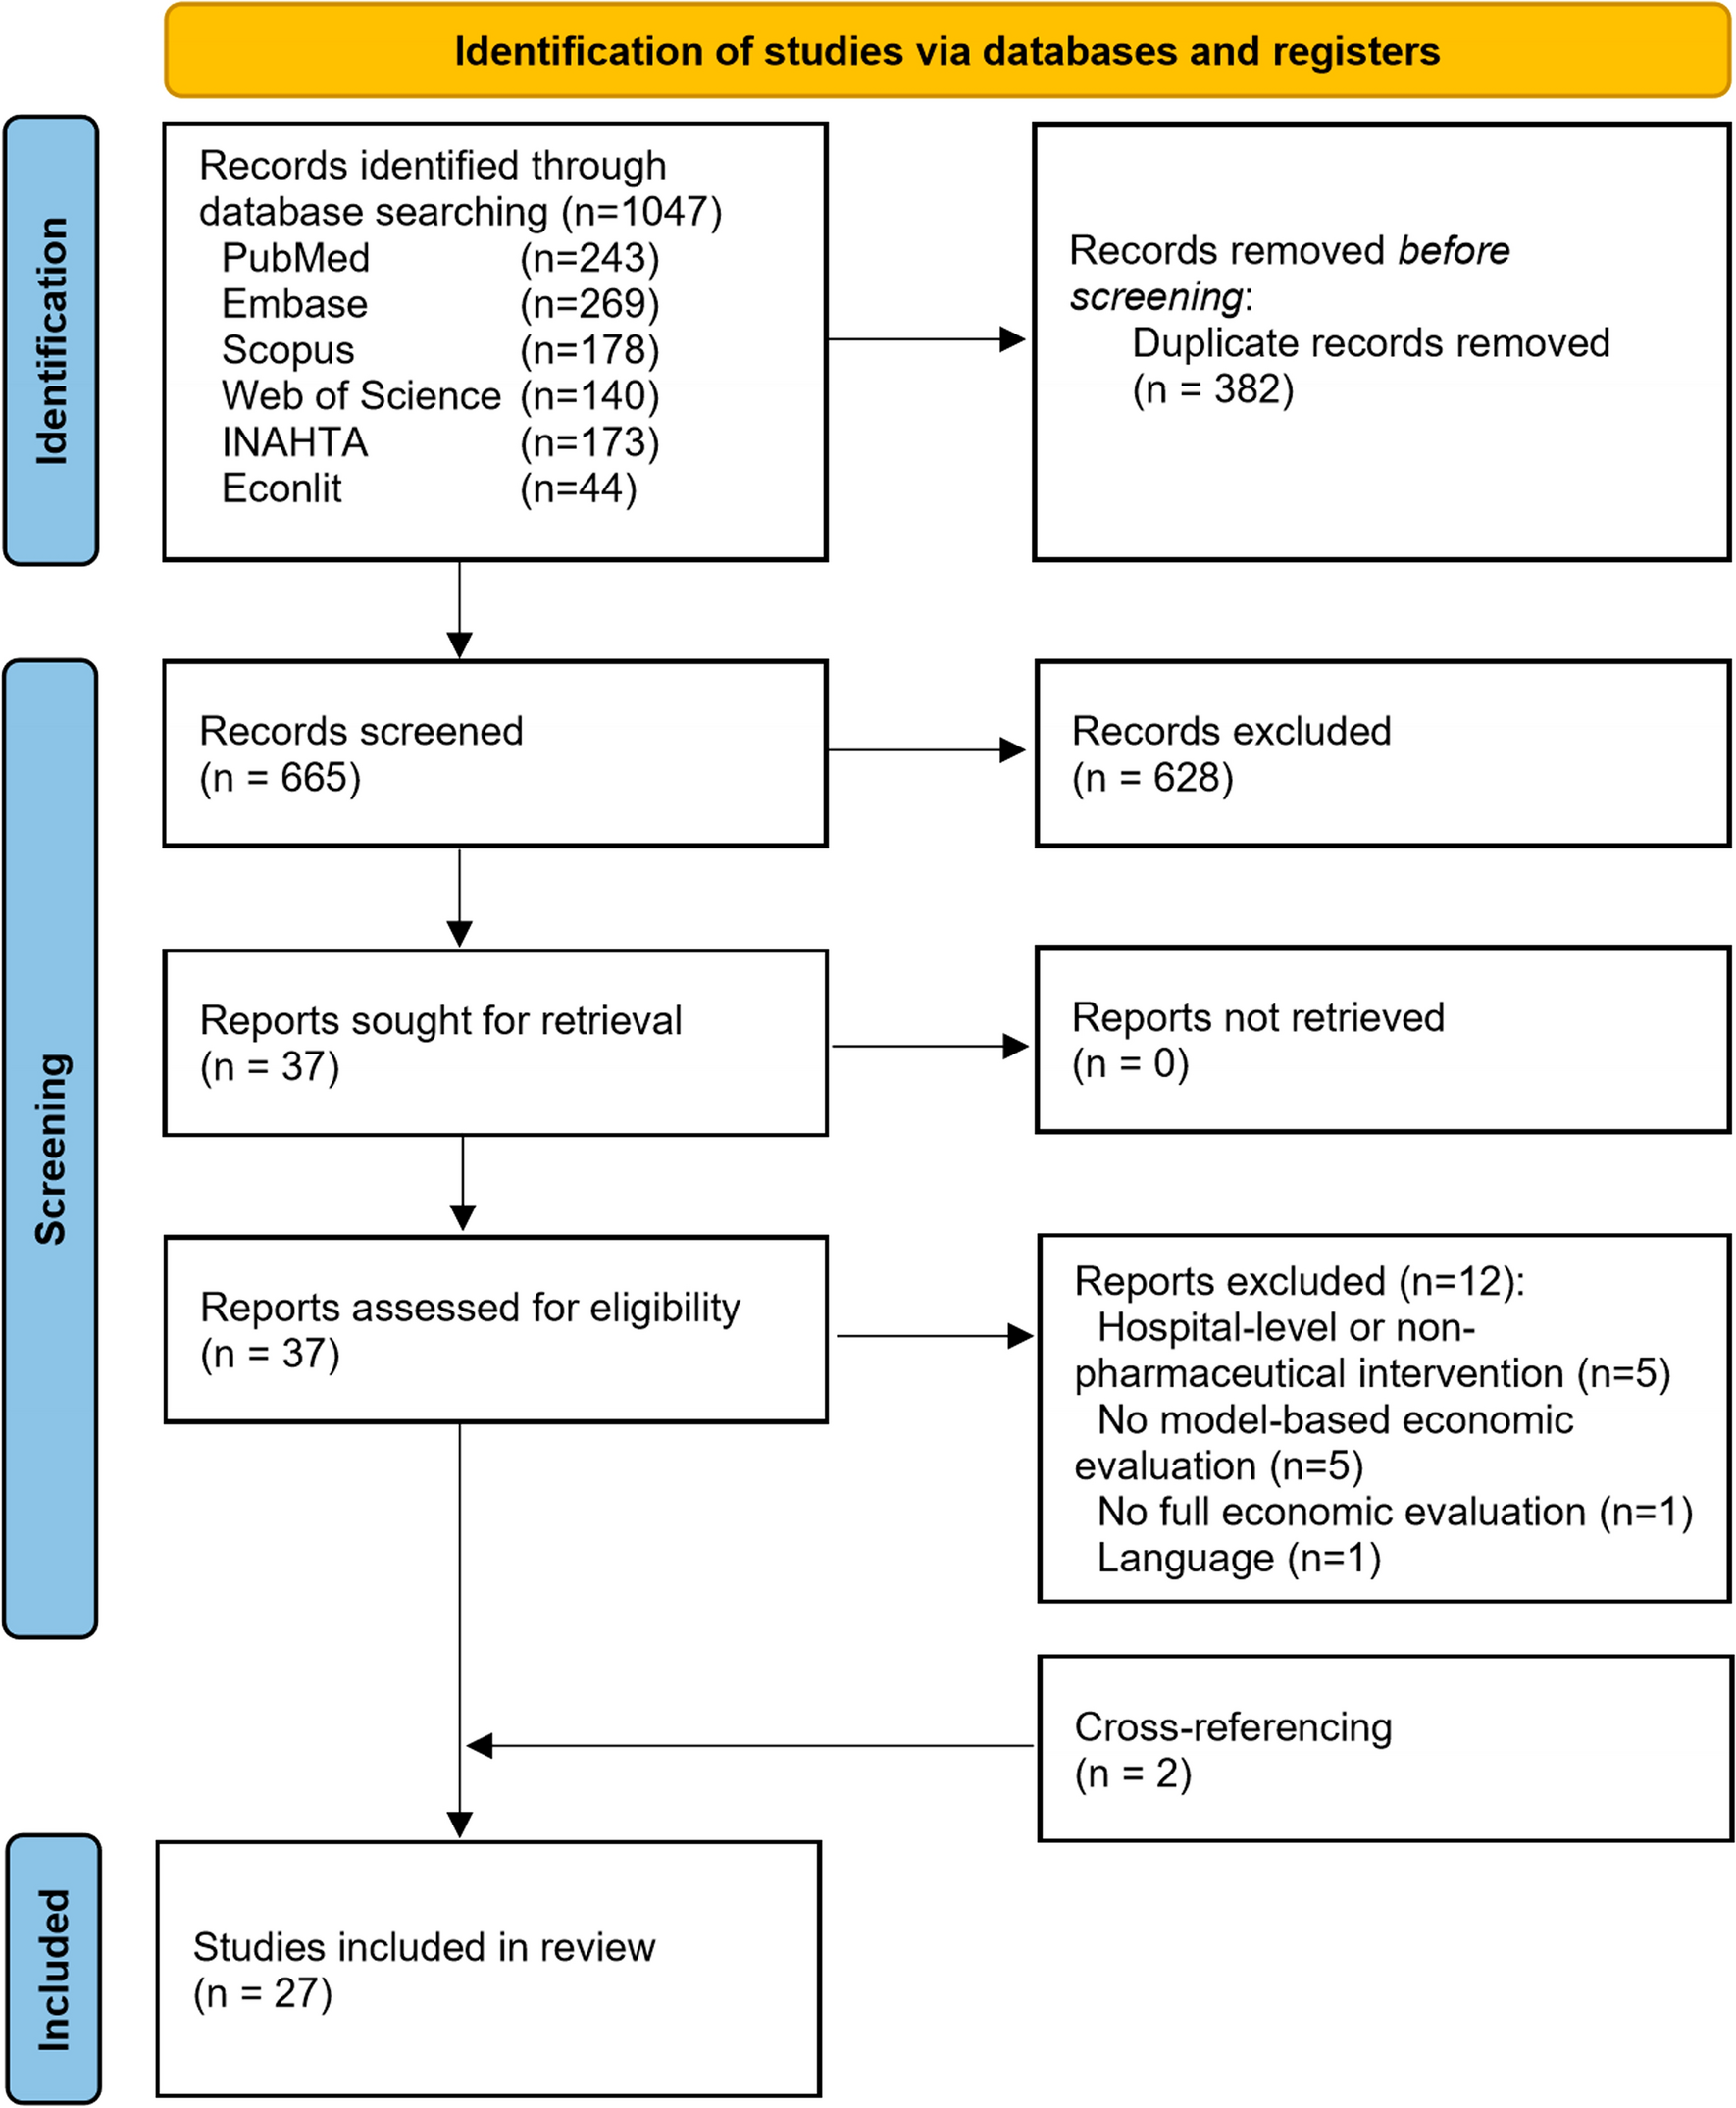 Lessons Learned from Model-based Economic Evaluations of COVID-19 Drug Treatments Under Pandemic Circumstances: Results from a Systematic Review